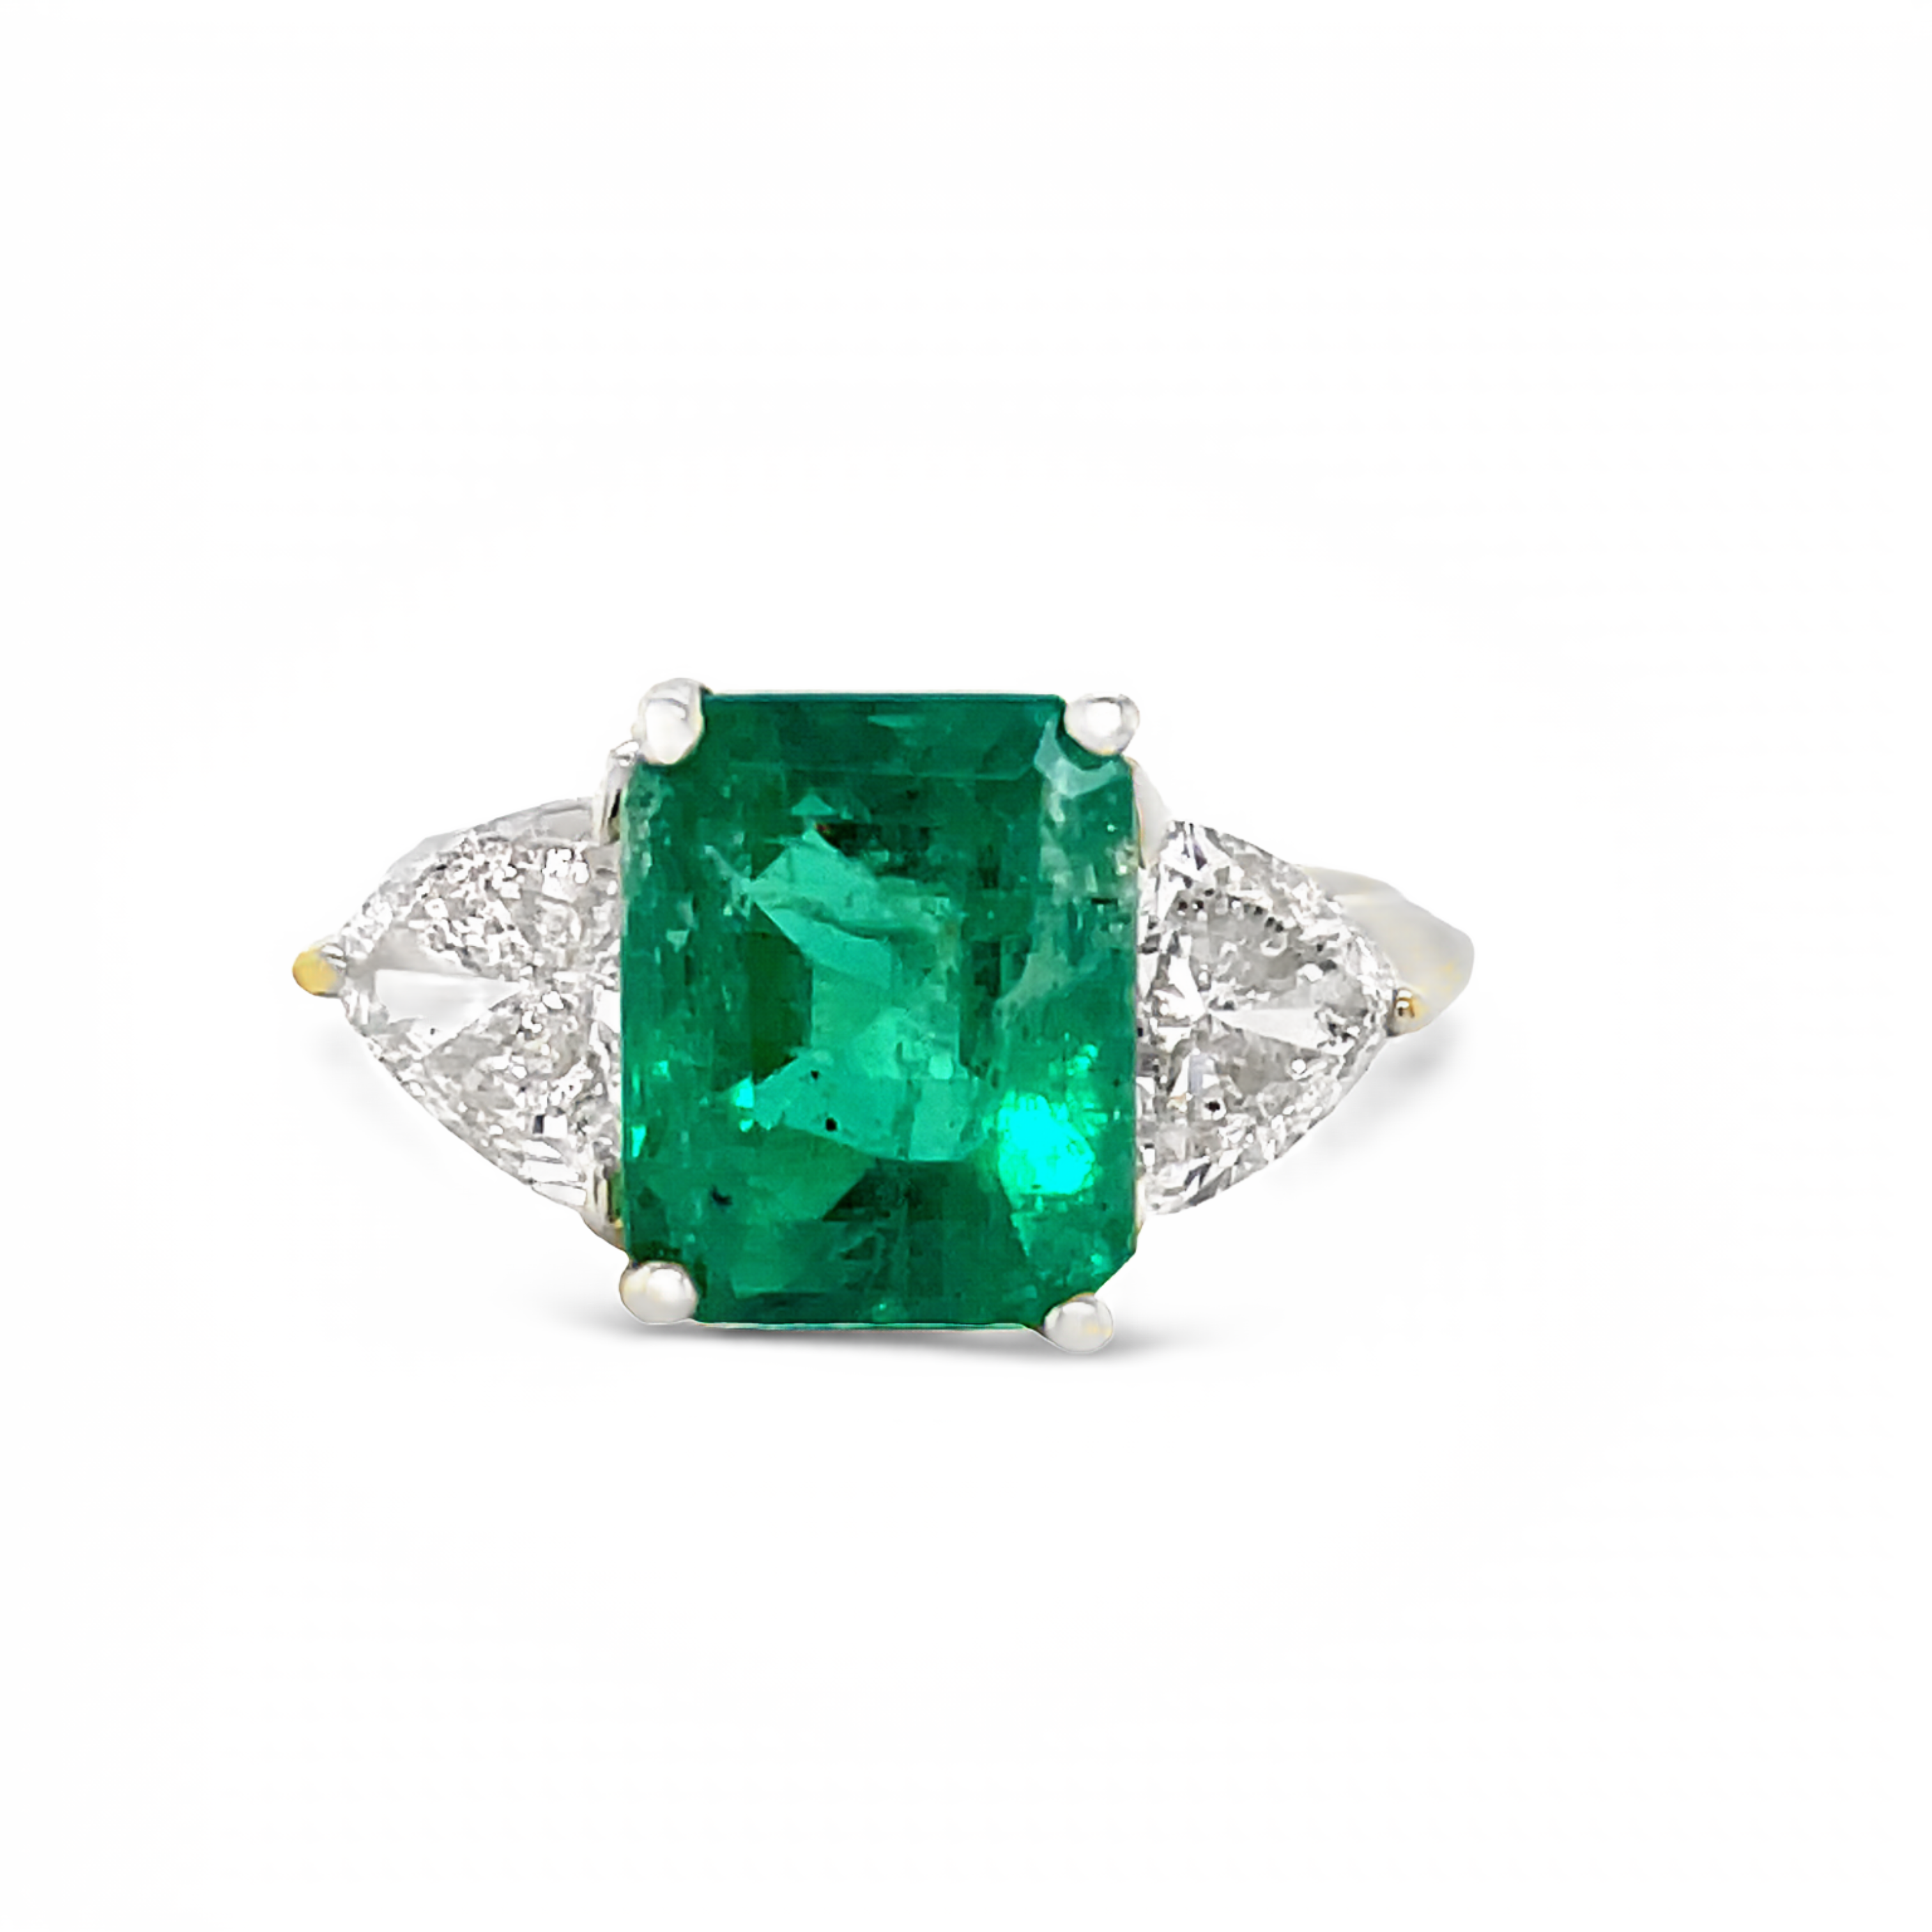 This stunning Muzo Mines emerald, boasting a 3.00 carat emerald cut, is the centerpiece of this 18k yellow gold ring. Accompanying it are two trillion cut diamonds weighing 1.30 carats, and the band measures 10.00 millimeters in width.